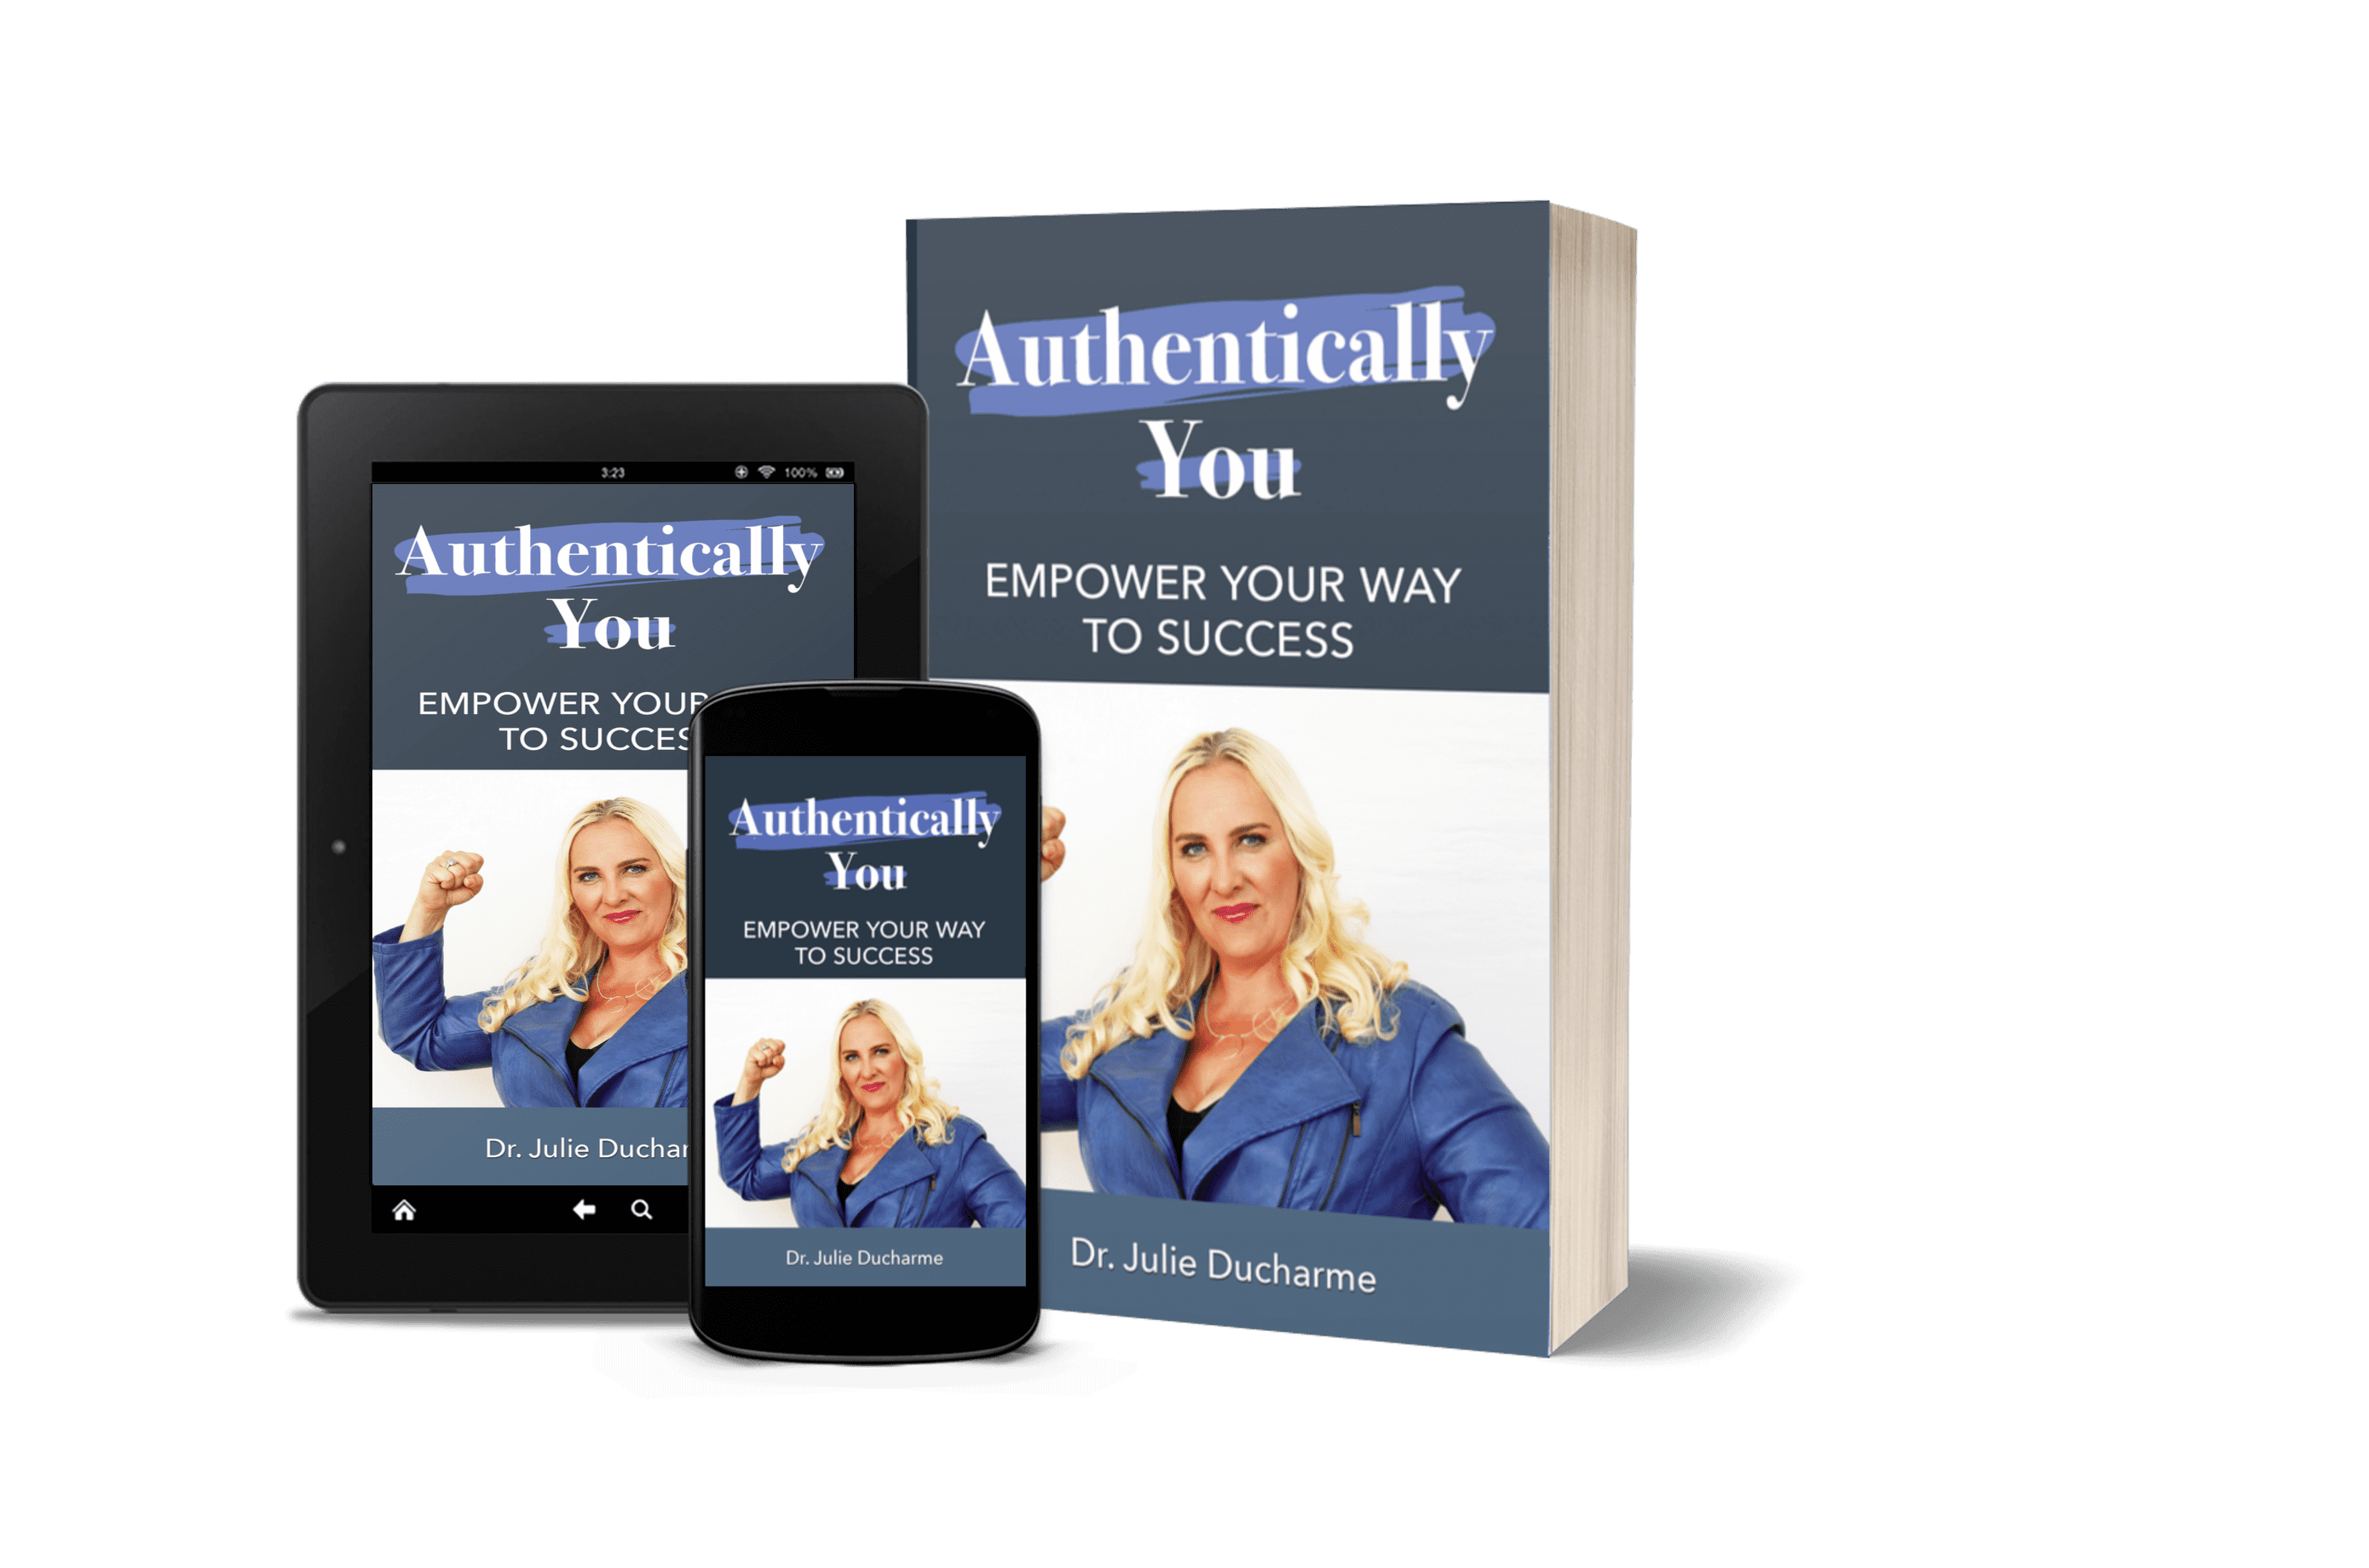 Authentically You: Empower Your Way to Success